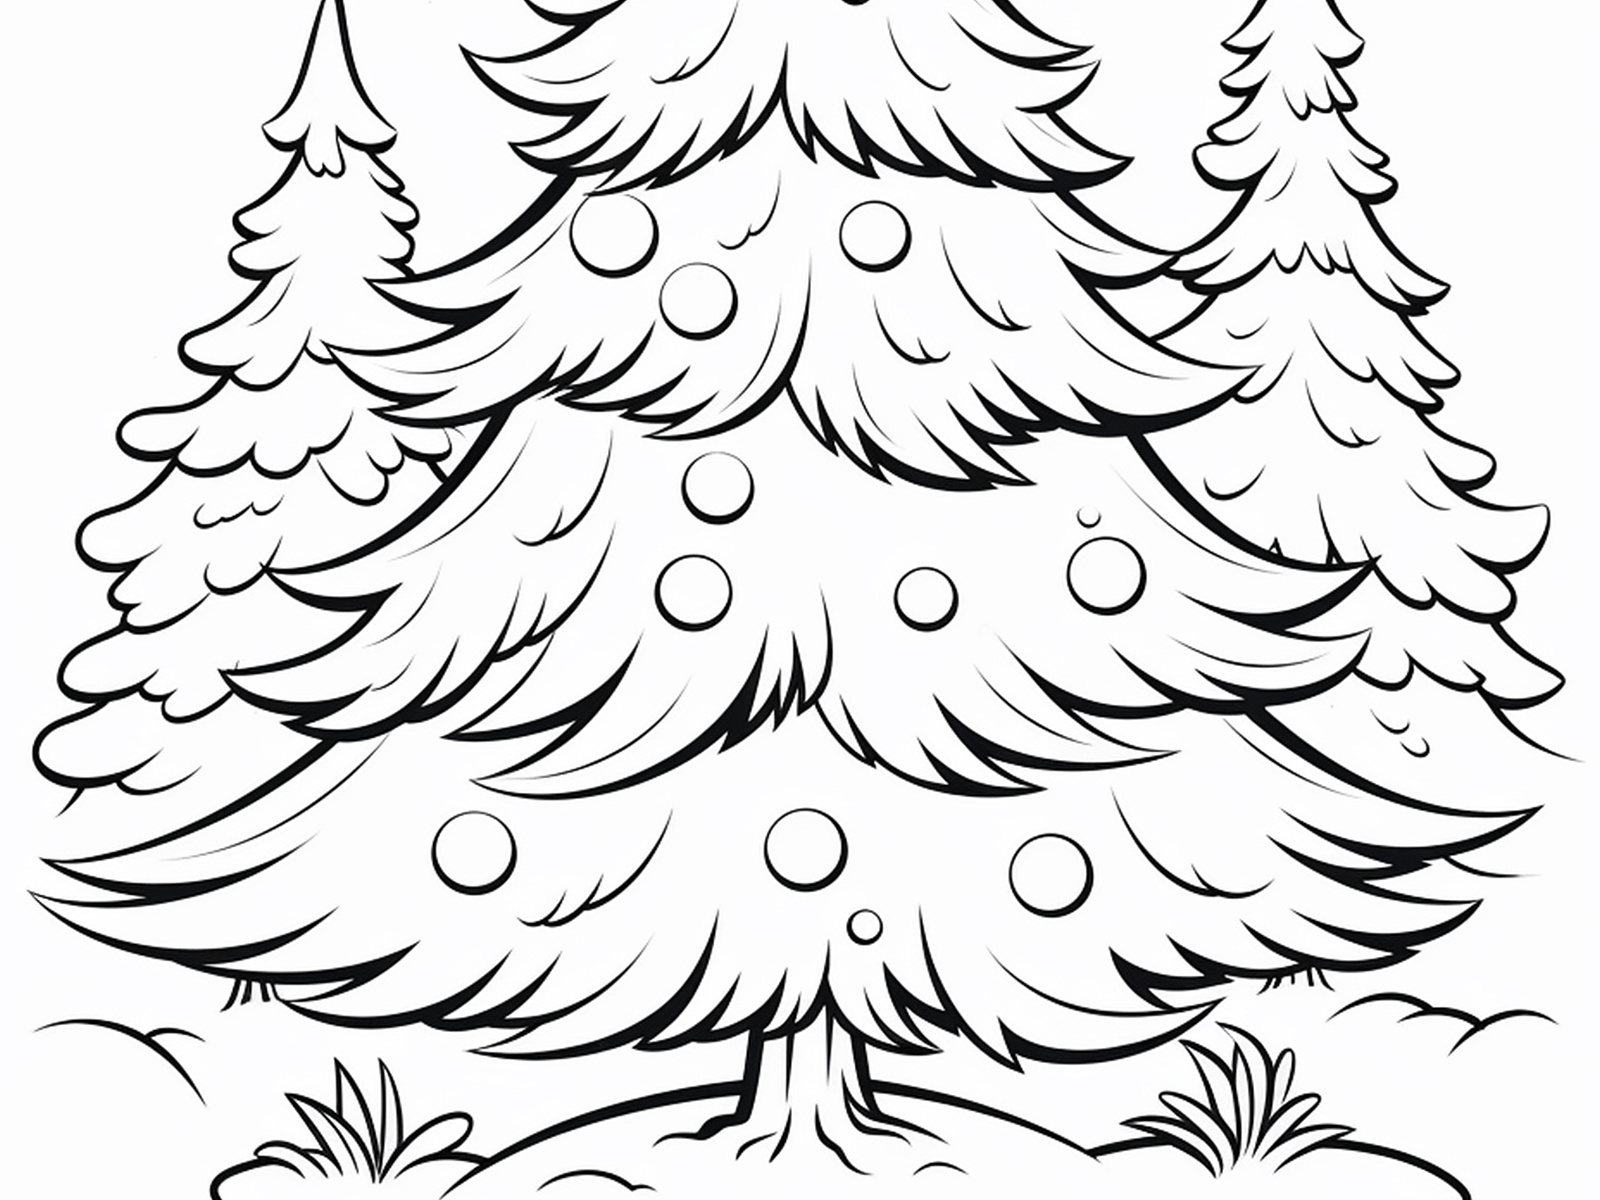 Christmas tree coloring pages for kids by asadul islam on